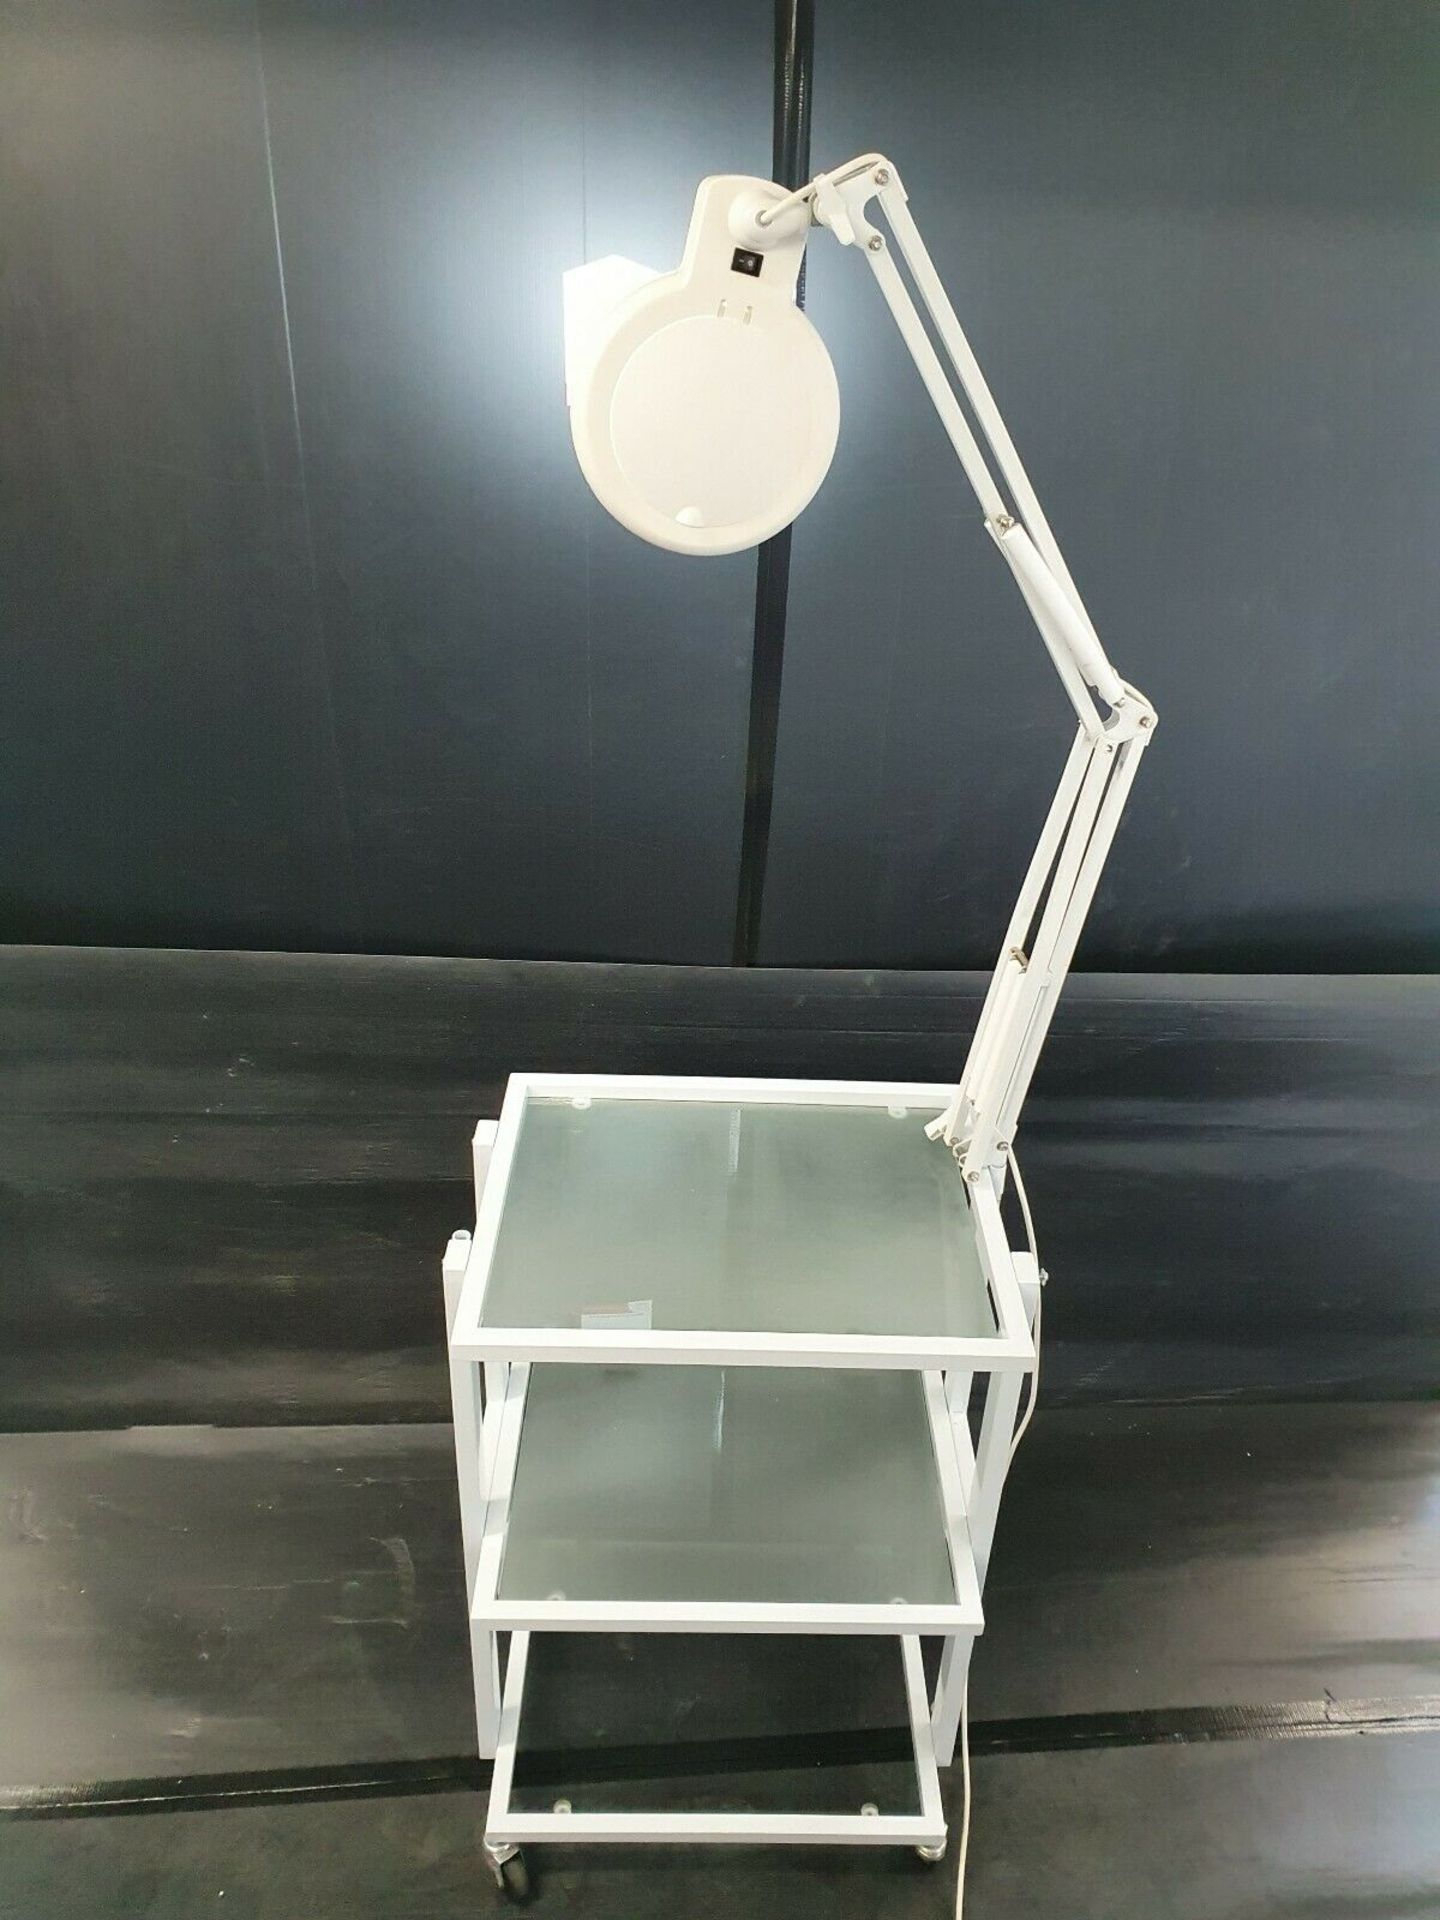 Desk Mounted Treatment Lamp - Image 2 of 6